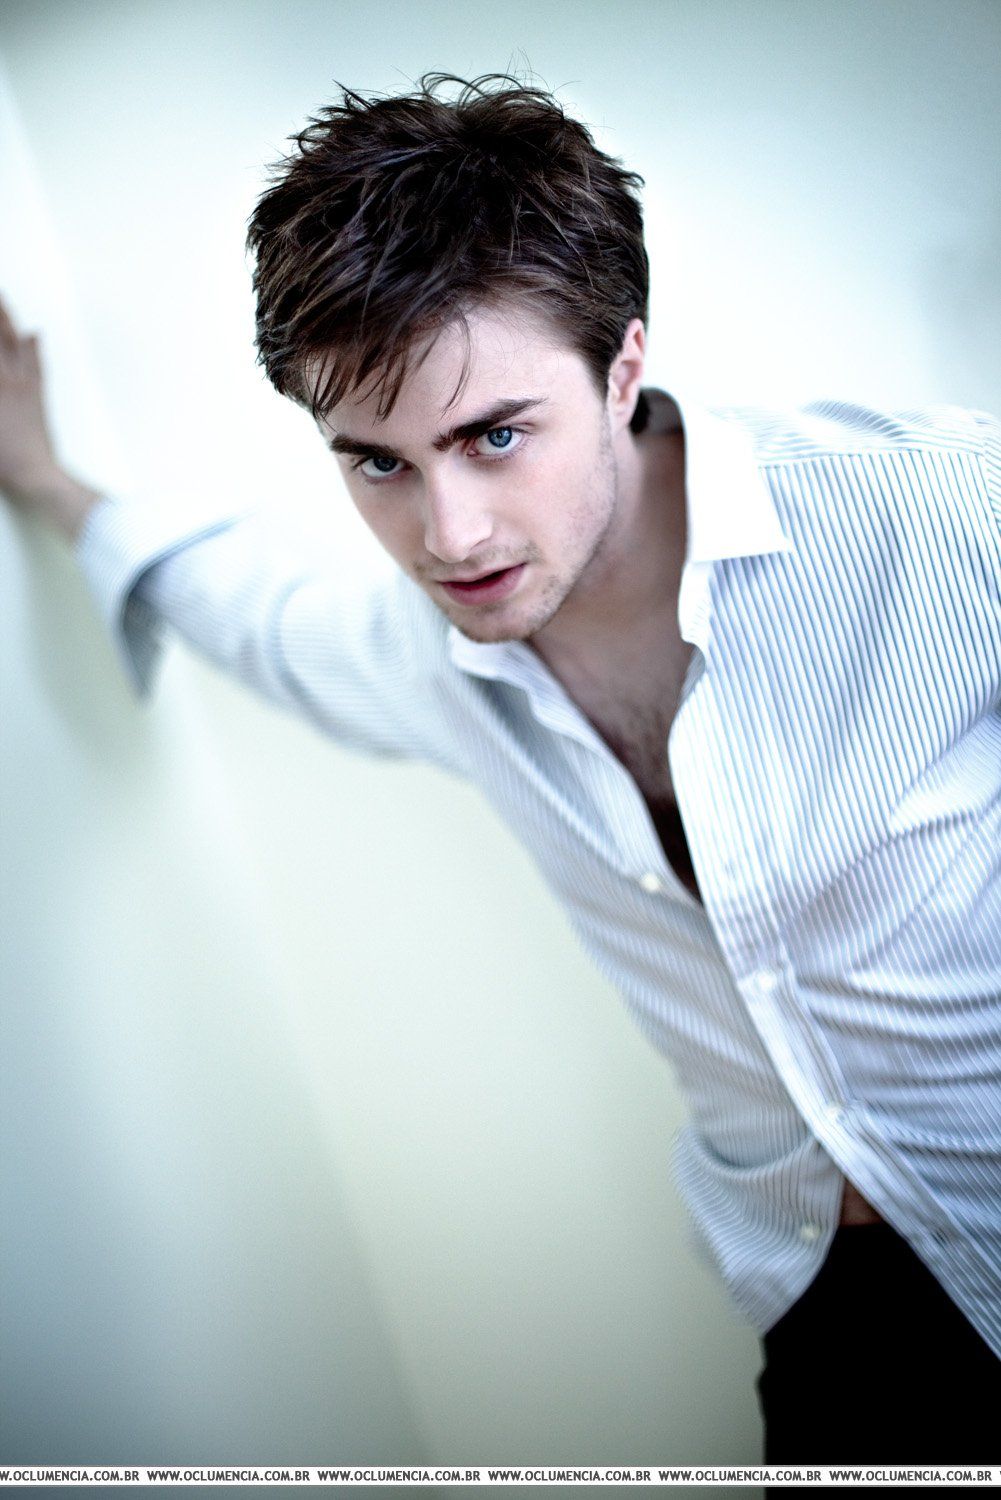 HD Wallpaper Pic Blog is the best blog for downloading free Daniel radcliffe high resolution. Daniel radcliffe, Daniel radcliffe harry potter, Harry james potter